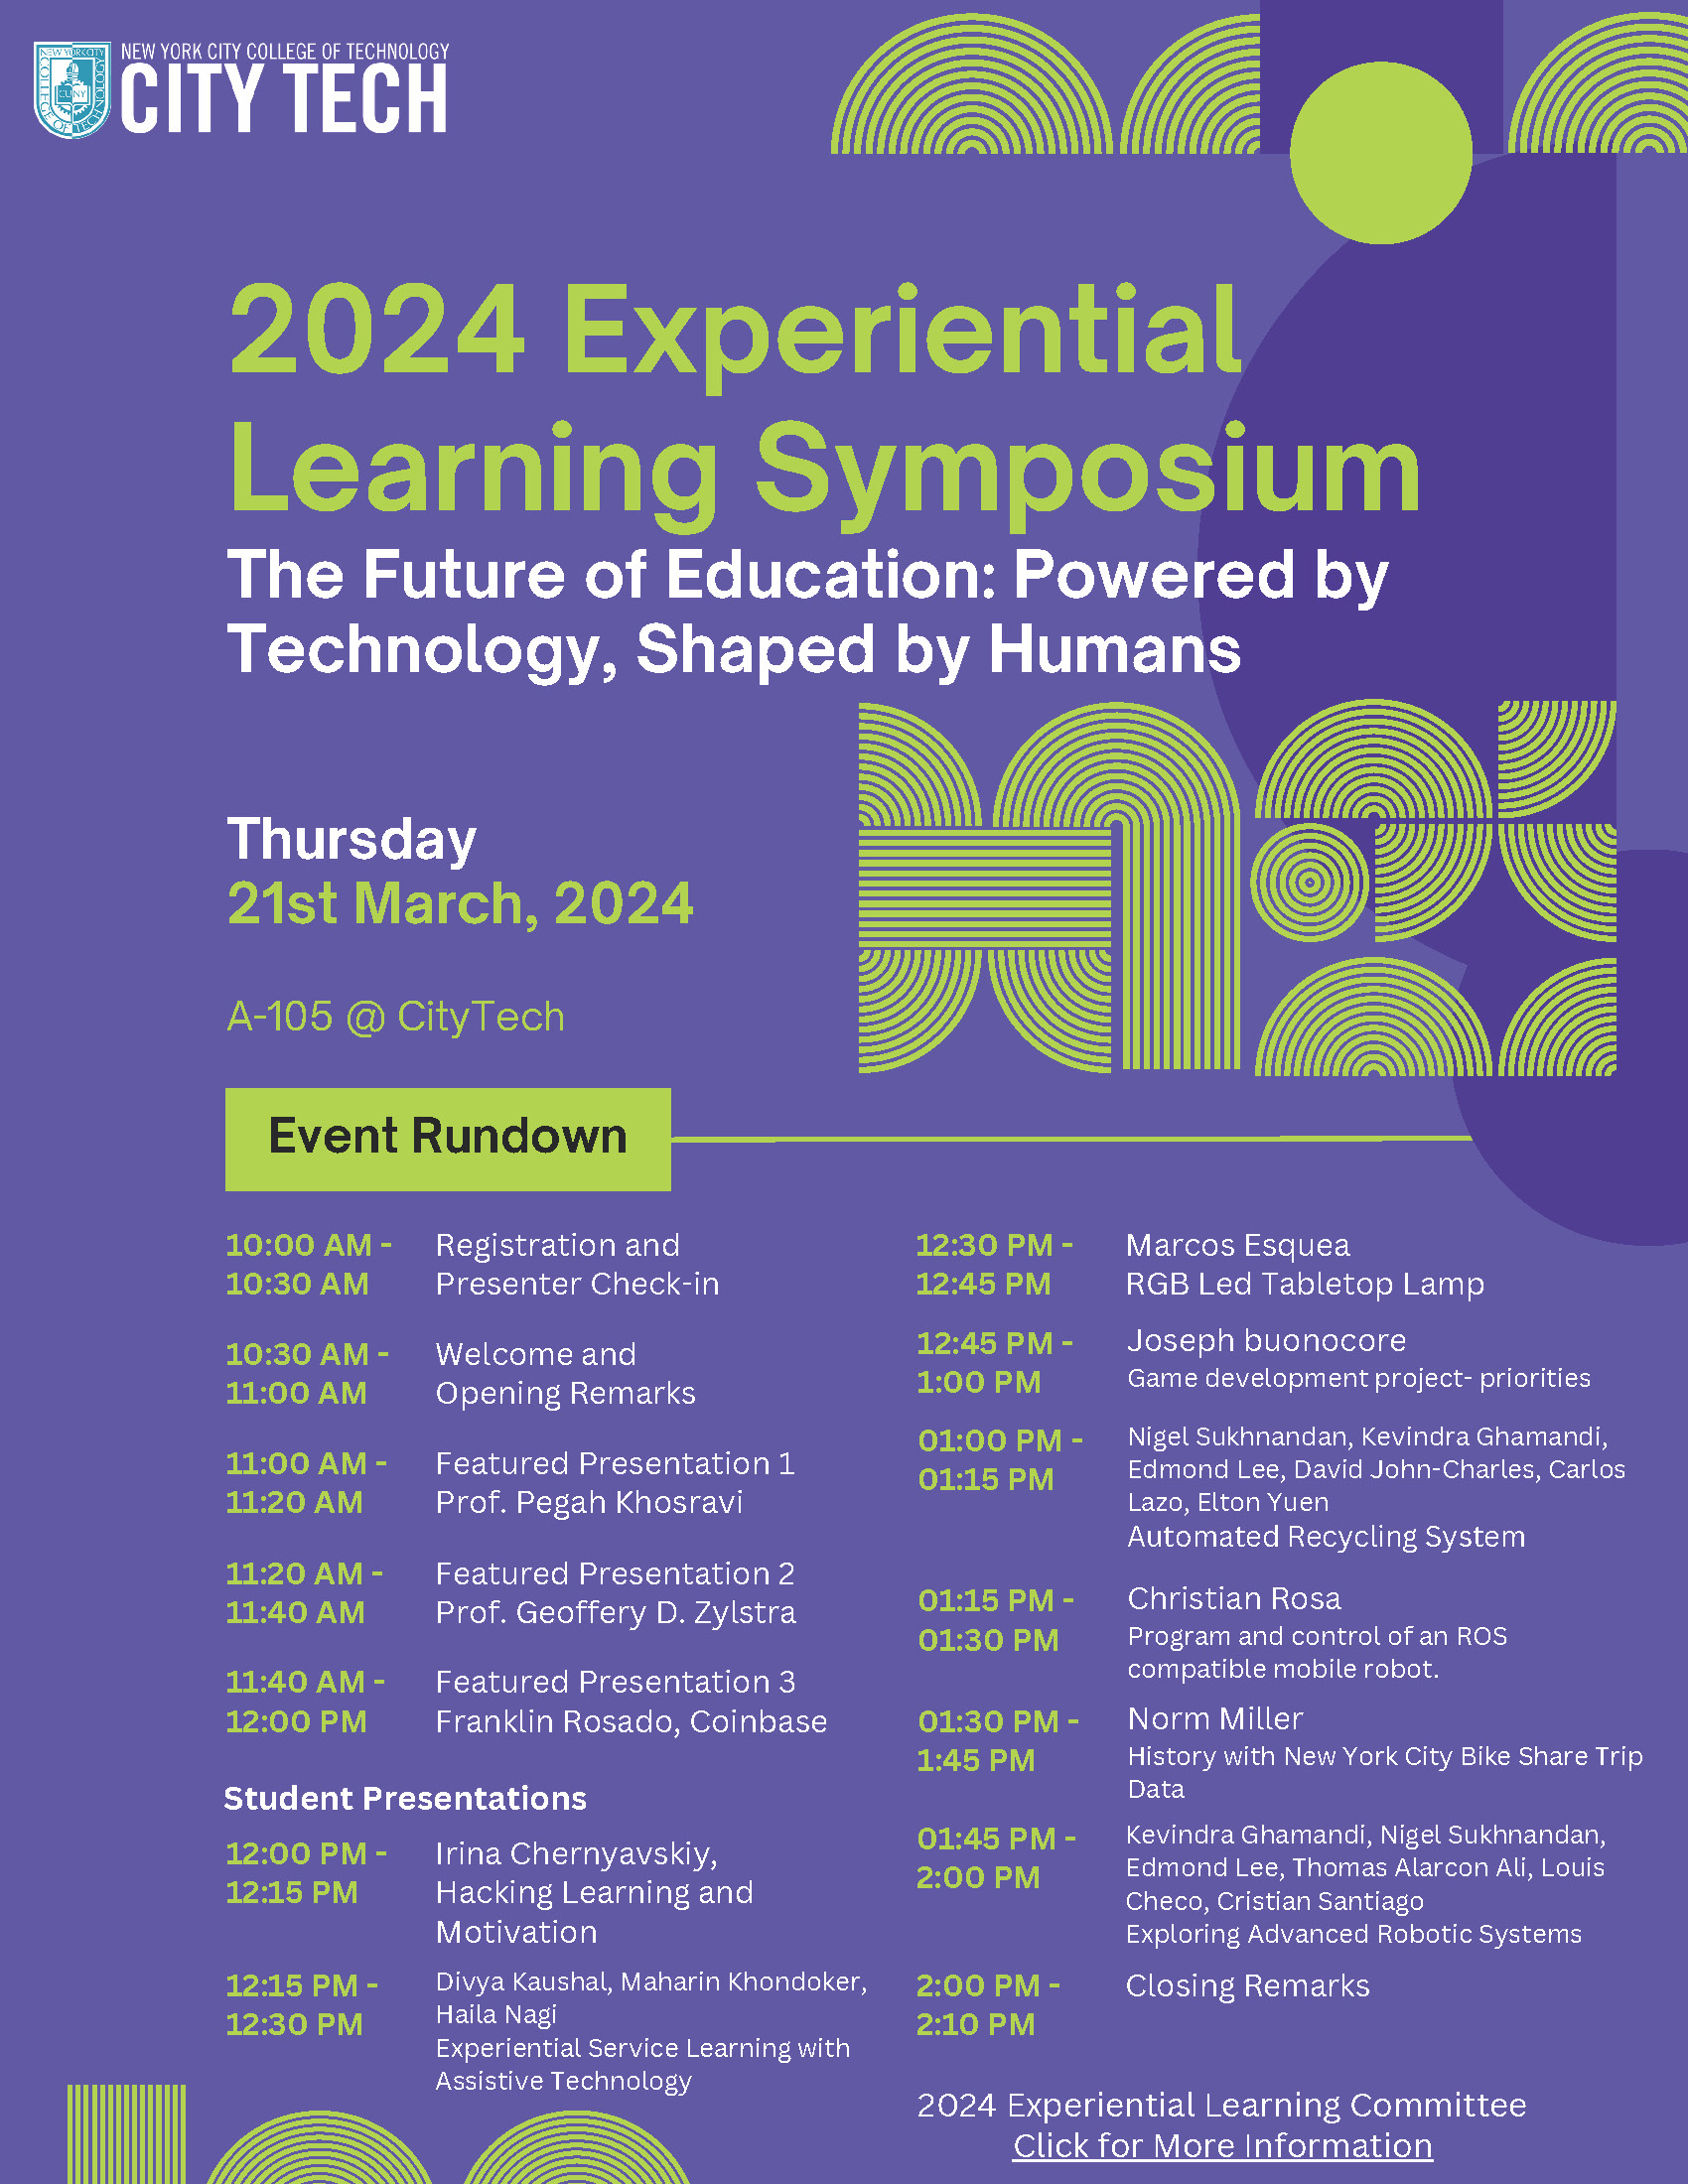 2024 Experiential Learning Schedule